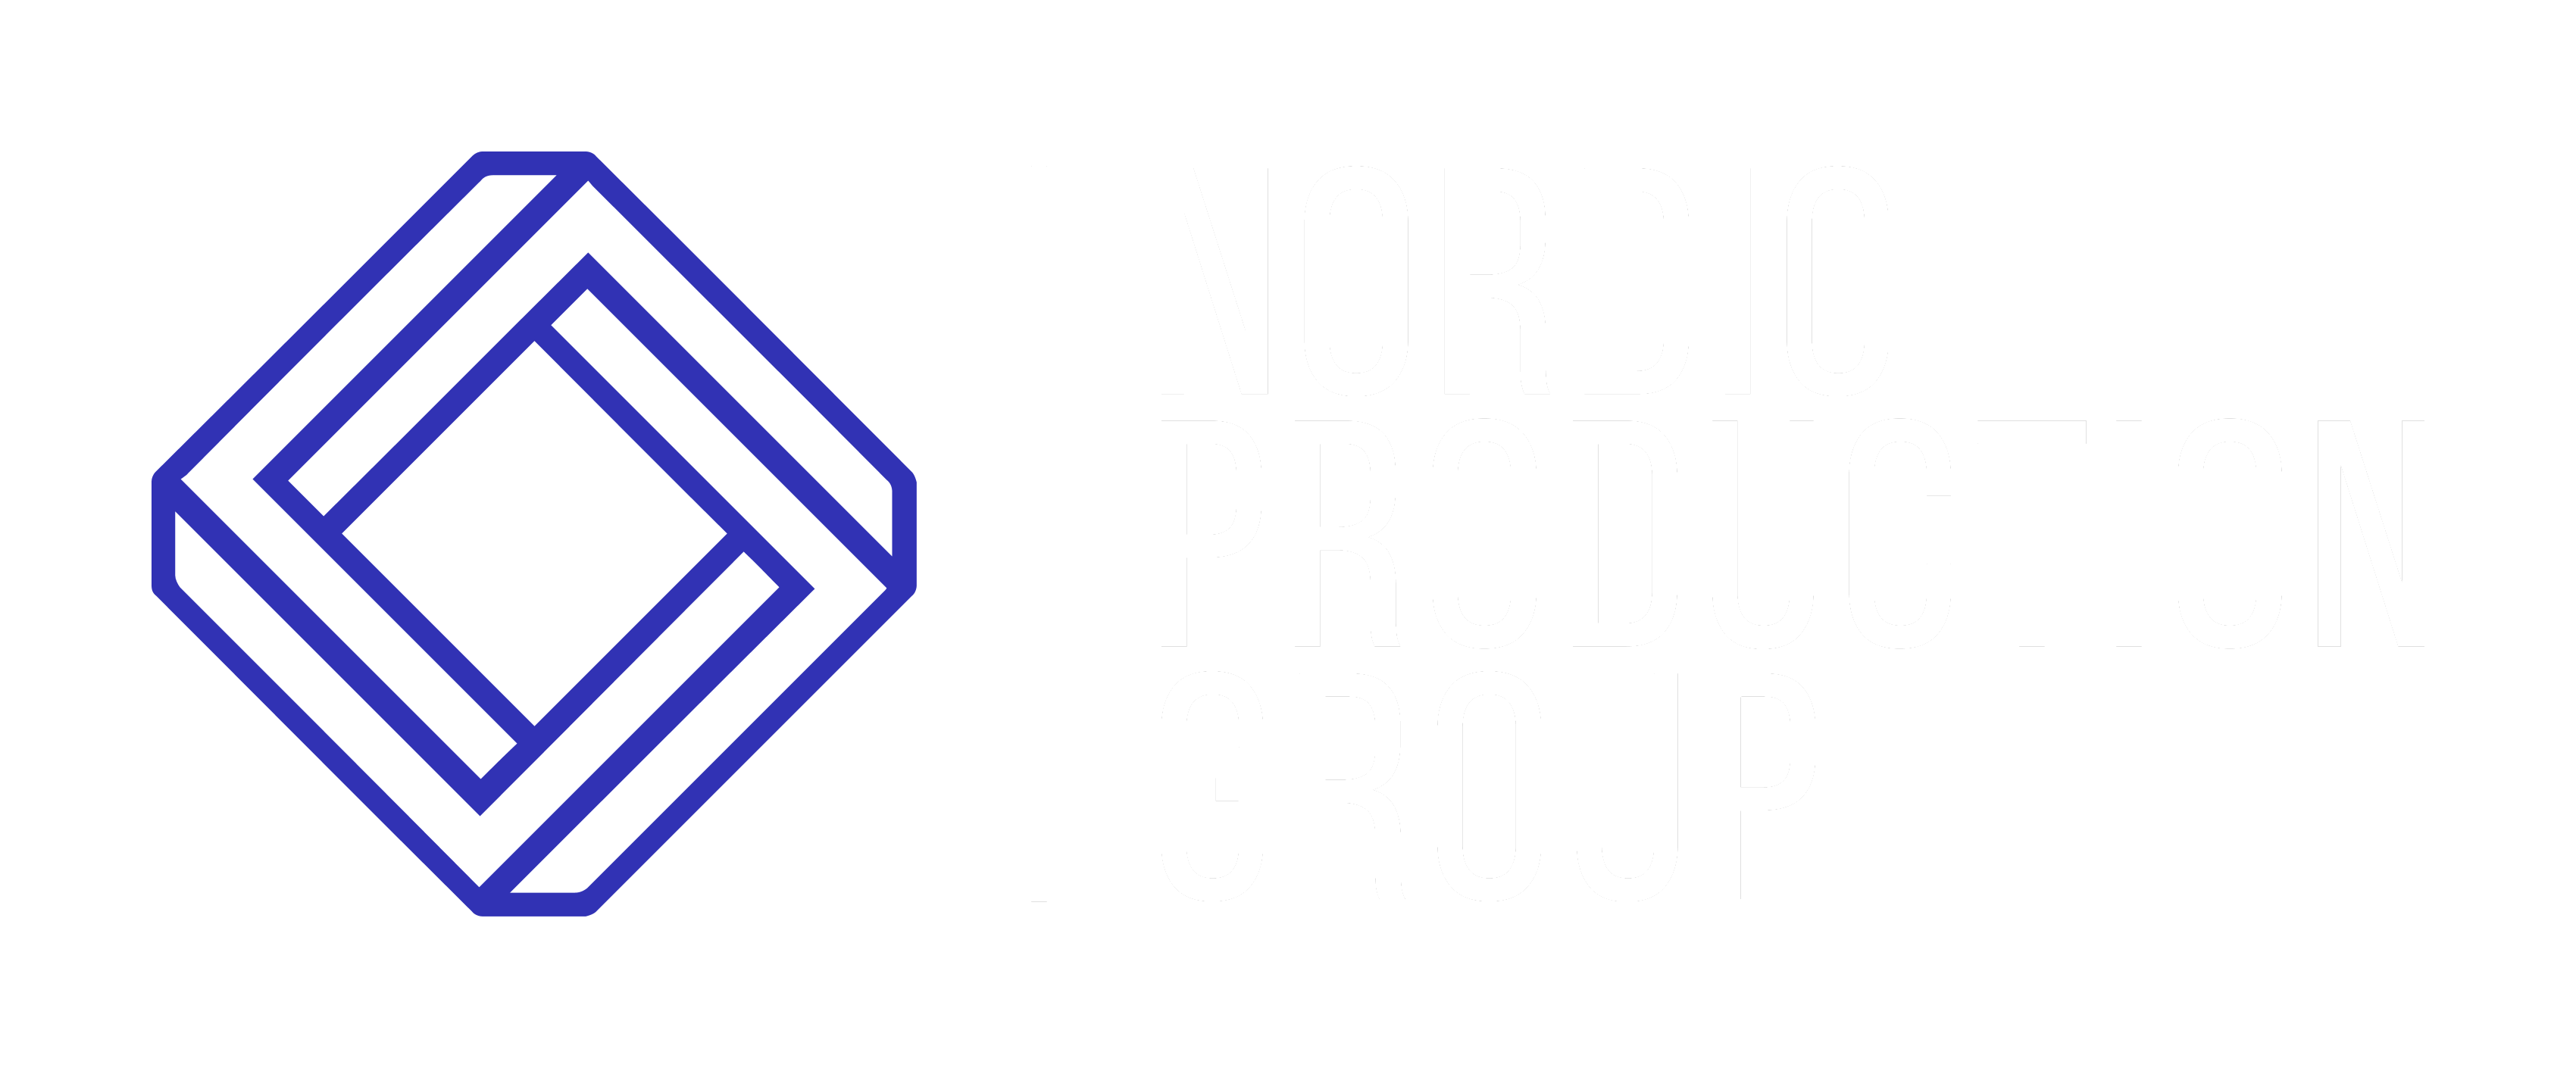 Nordic Production Group Logo